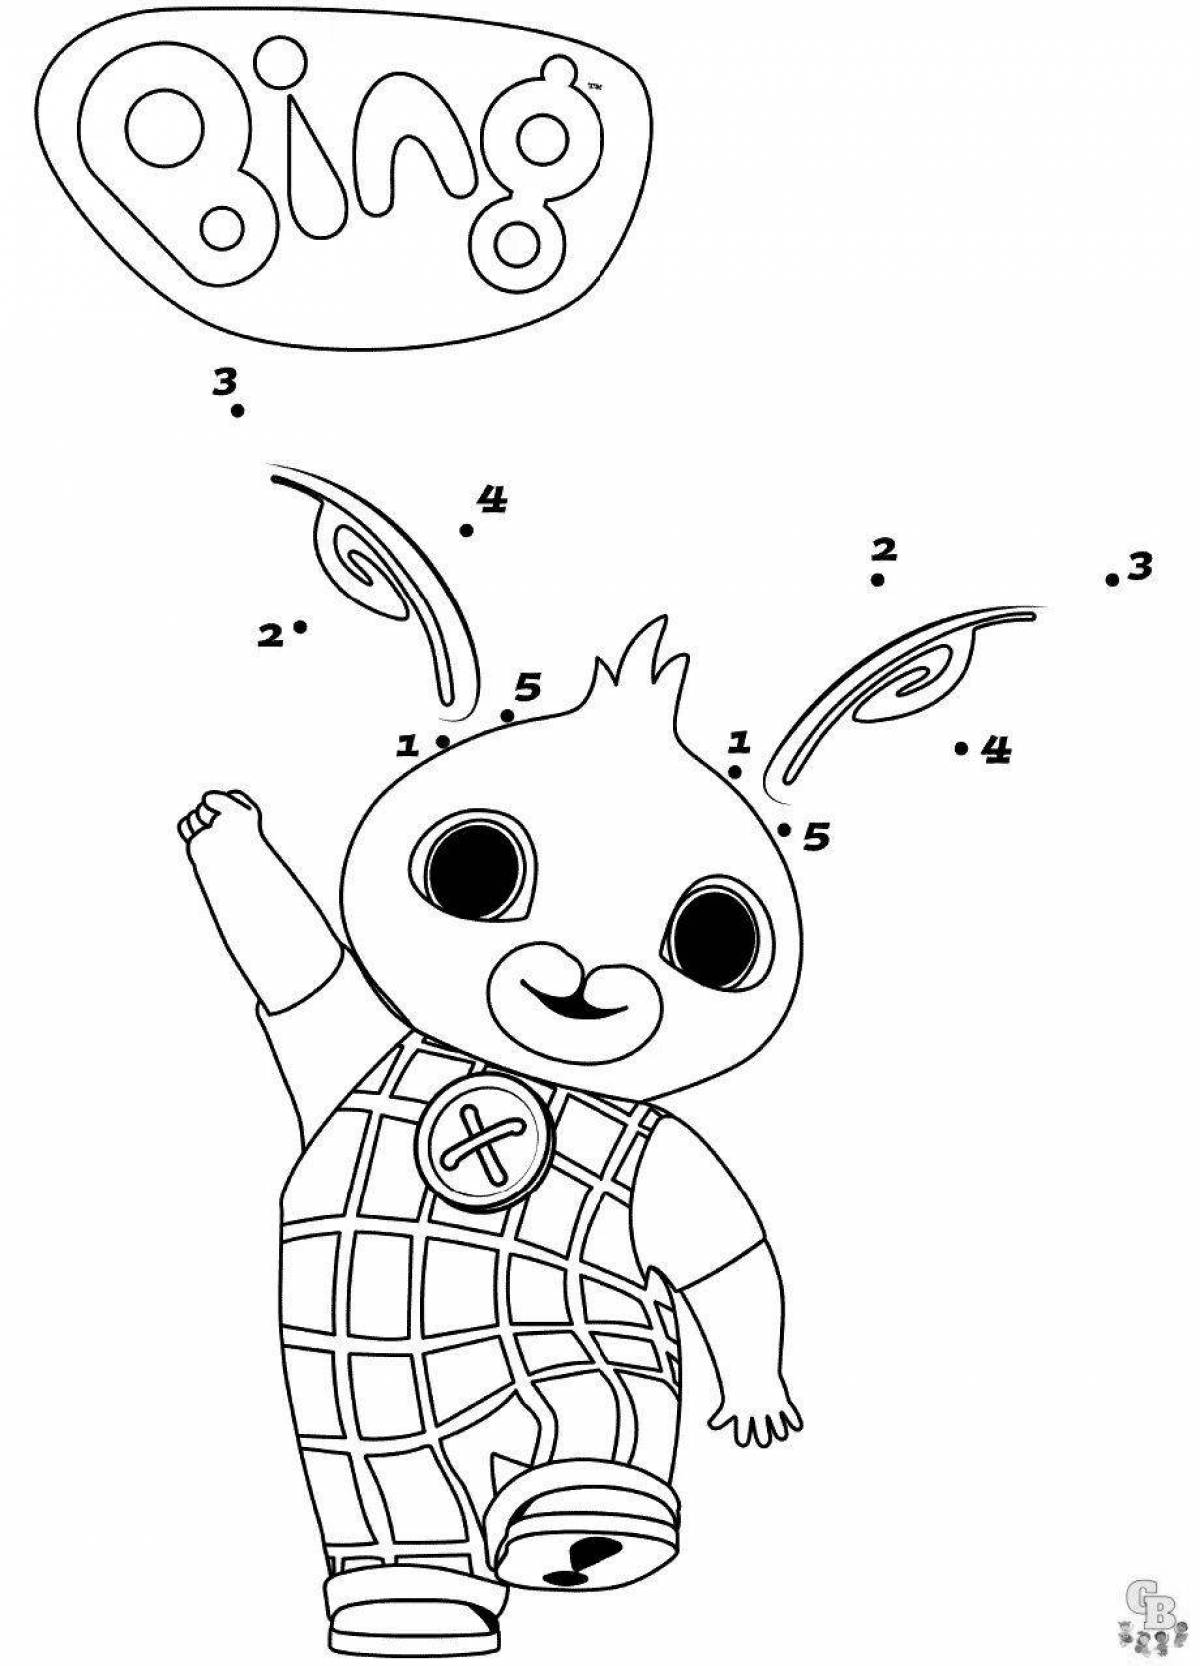 Bing sunny rabbit coloring page